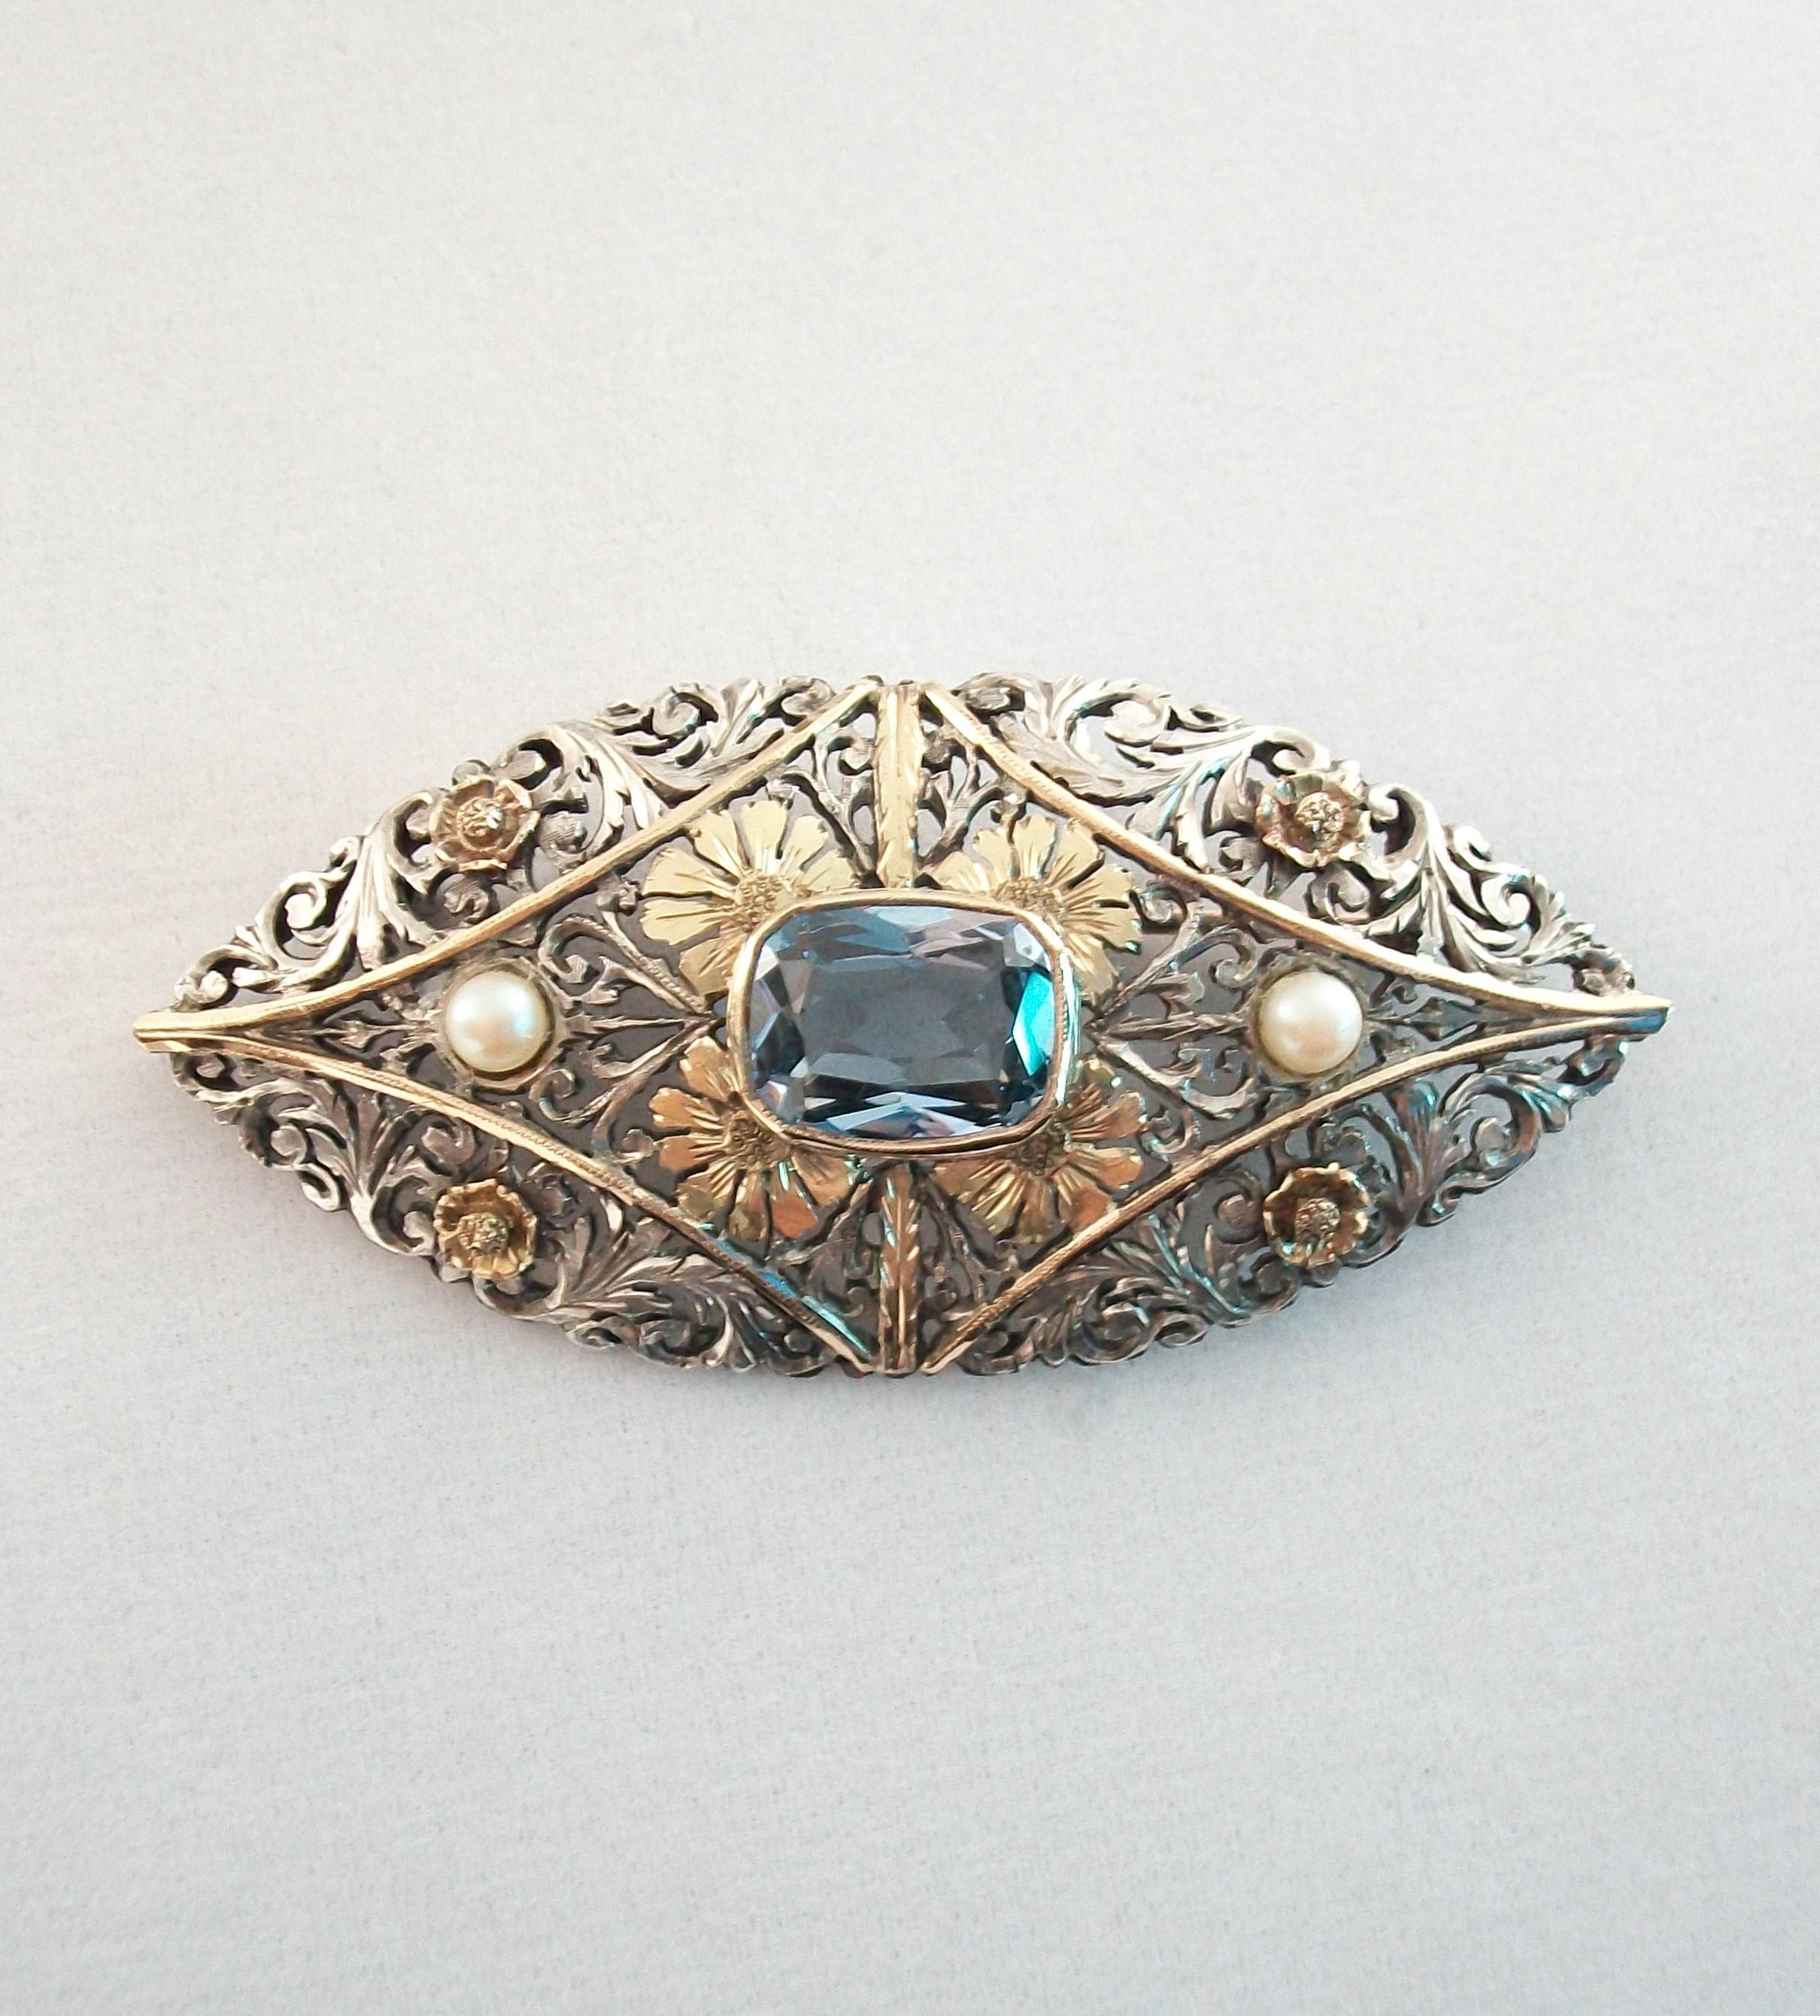 Art Nouveau Aquamarine & Pearl Brooch Set in Silver & Gold - France - Circa 1900 For Sale 4